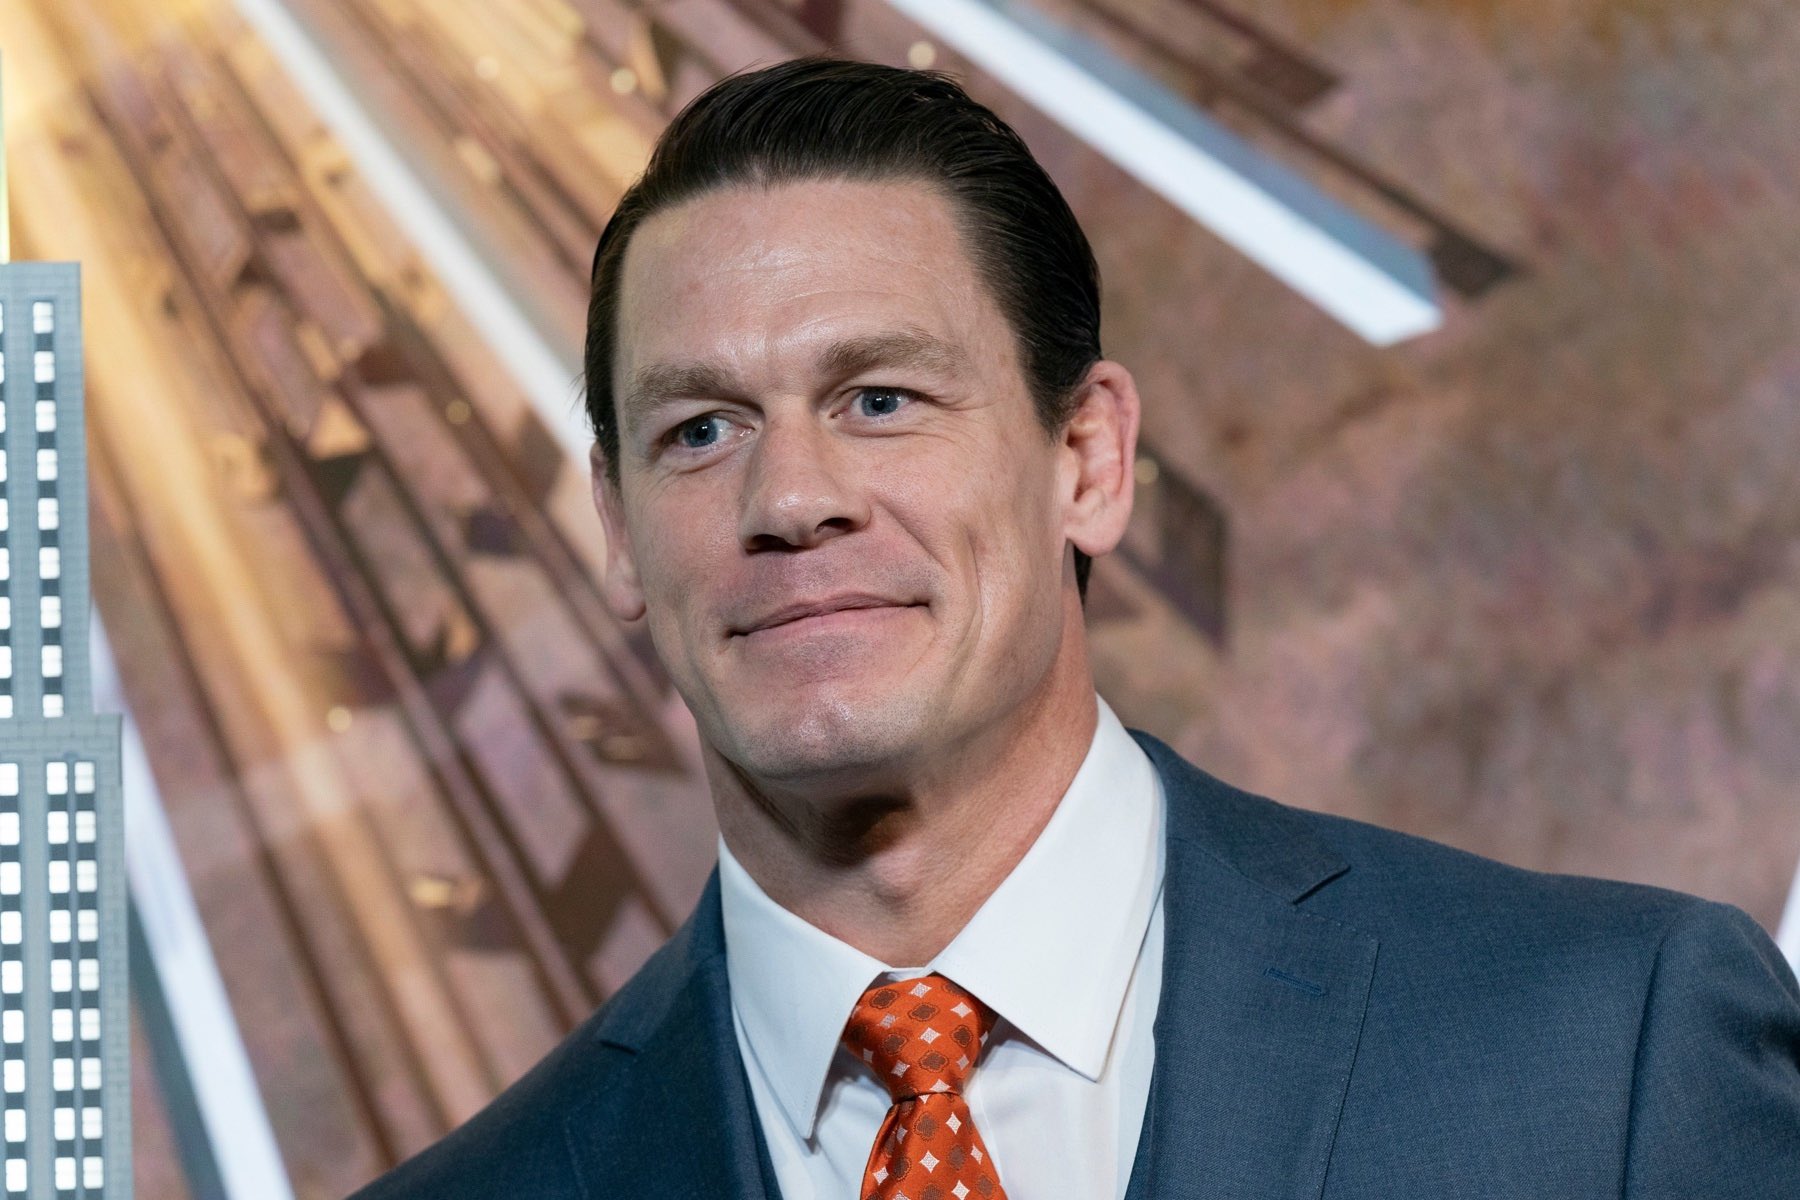 John Cena has set a new record for most wishes granted through the Make A Wish Foundation with 650 wishes granted for critically ill children. https://t.co/zf4nDZcqRX